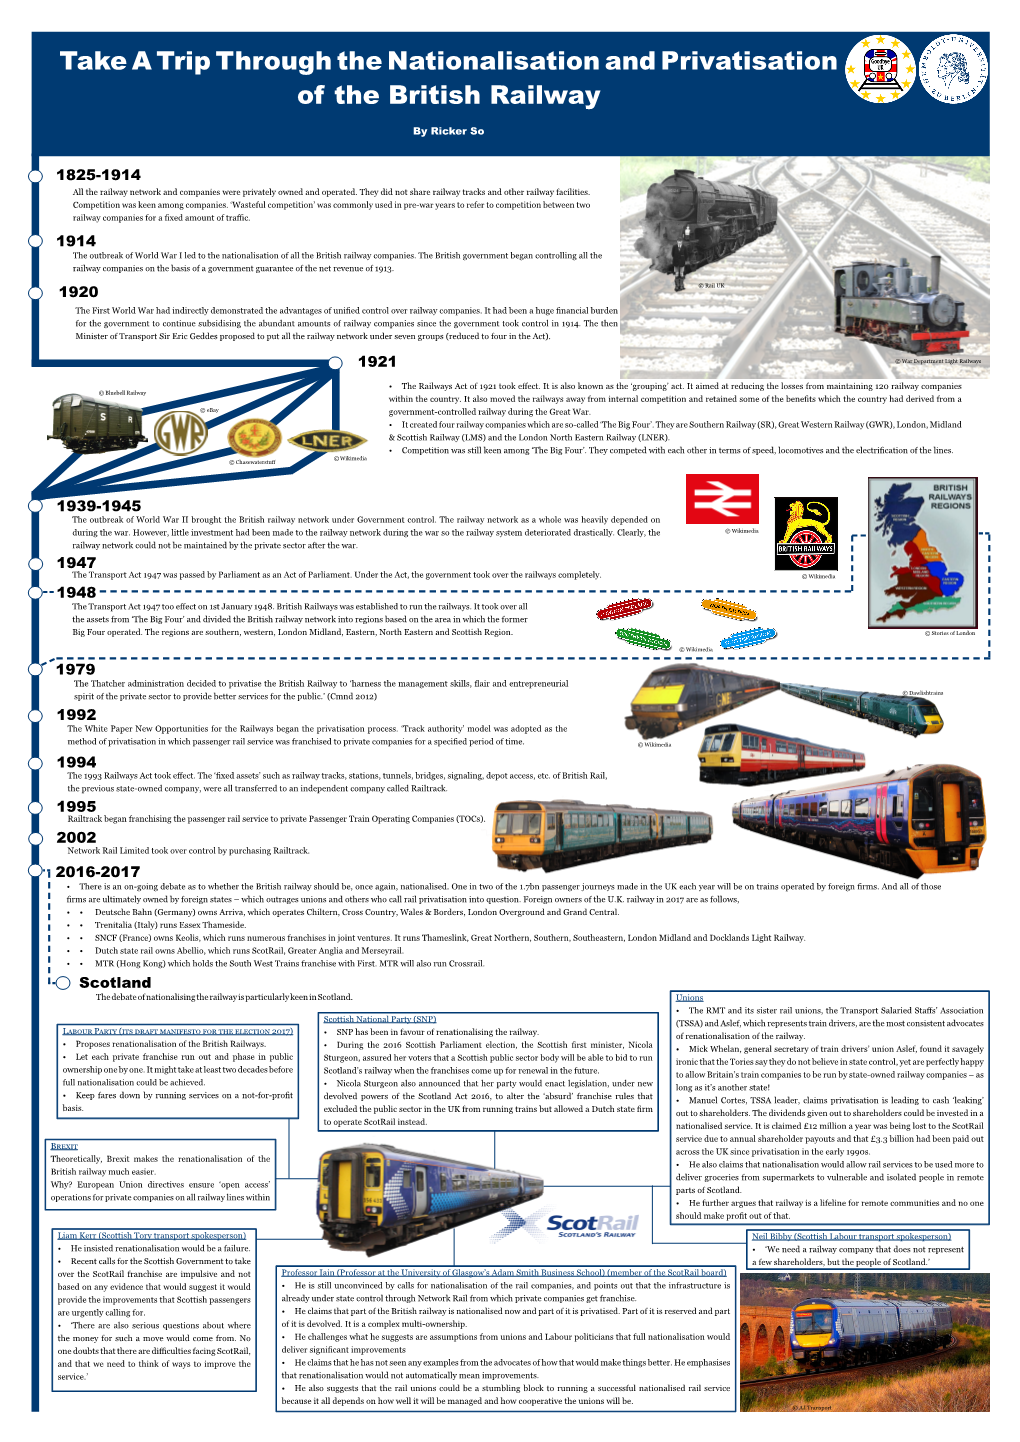 Take a Trip Through the Nationalisation and Privatisation of the British Railway